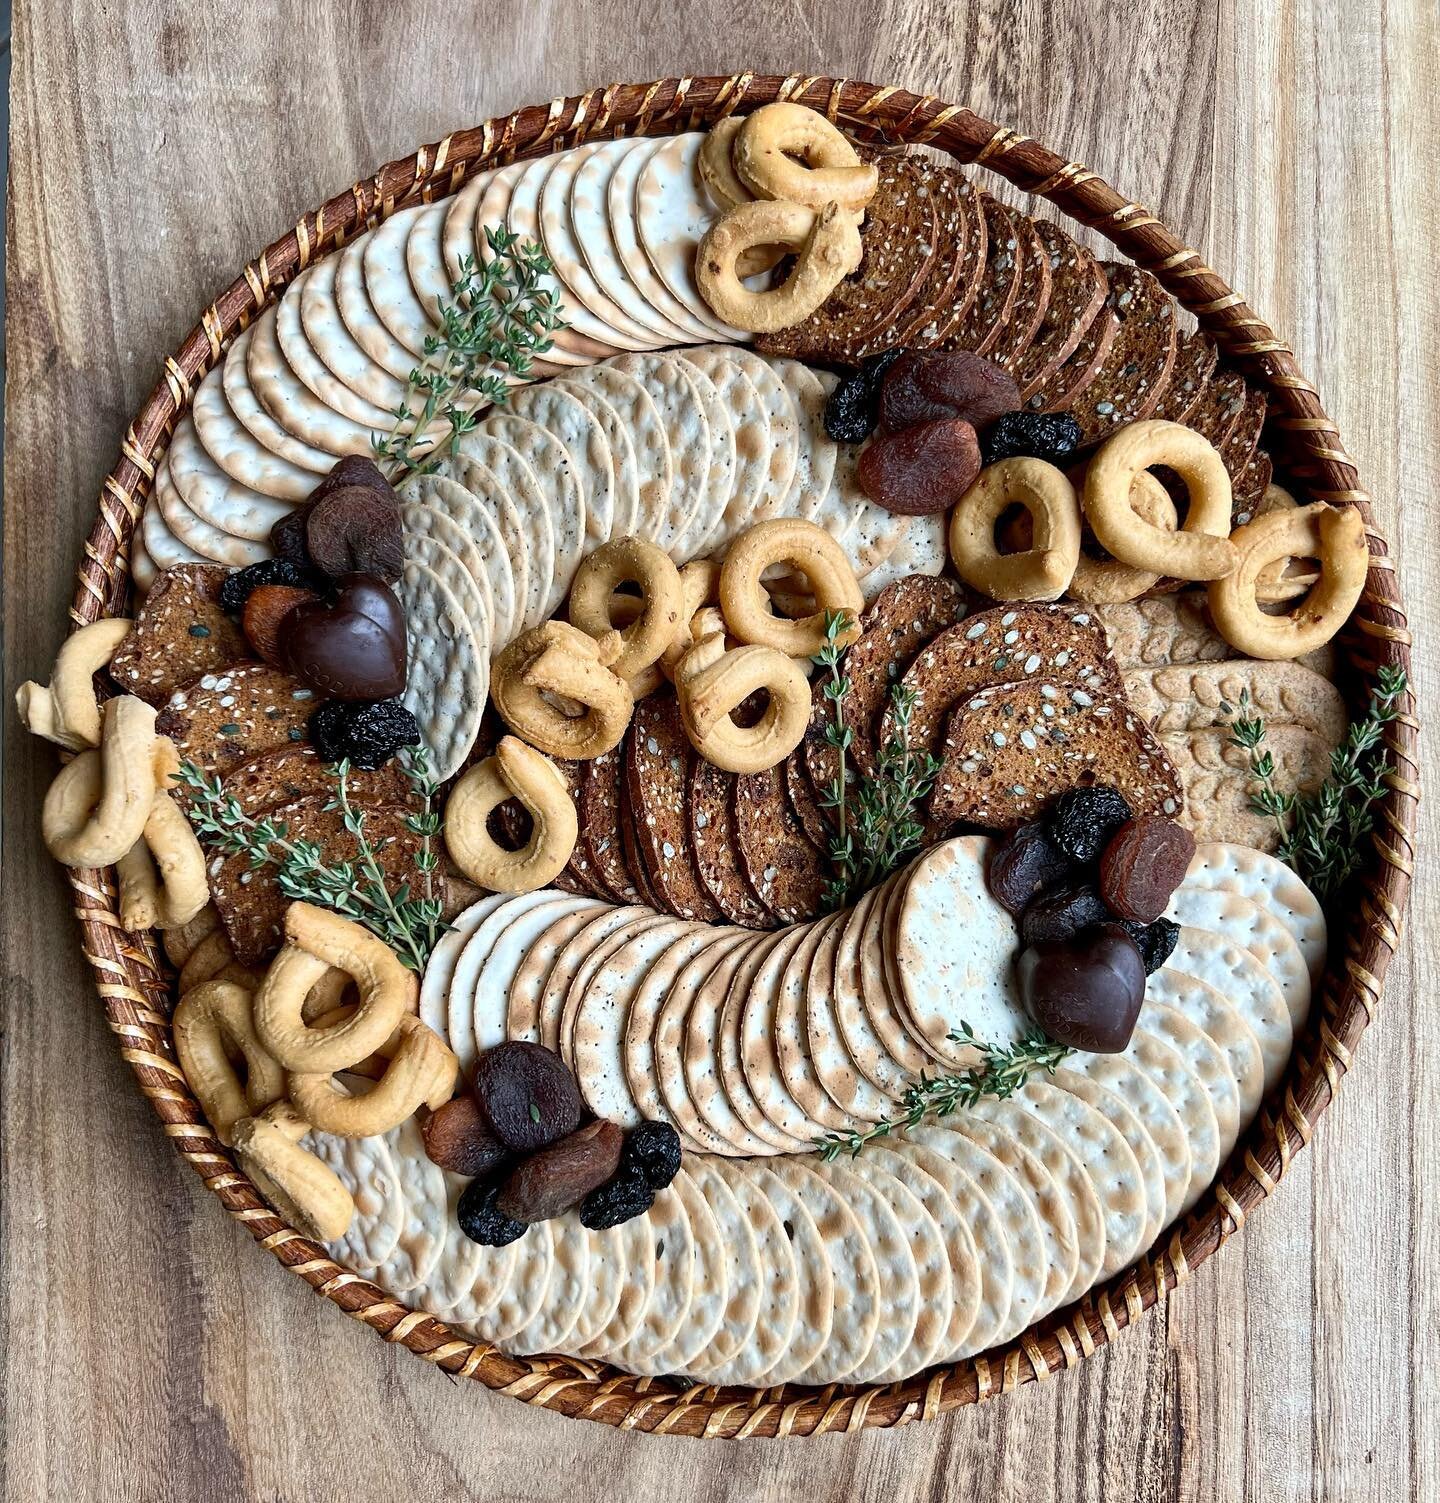 Who doesn&rsquo;t adore a Gorgeous Gourmet Cracker Box?!? 🍞🥖🍞🥖

@madebymerryny we custom curate every Cracker Box Assortment to feature only the best Artisan Crackers, Dried Fruit, Nuts, Chocolates, and Specialty Sweets, to satisfy the most colos